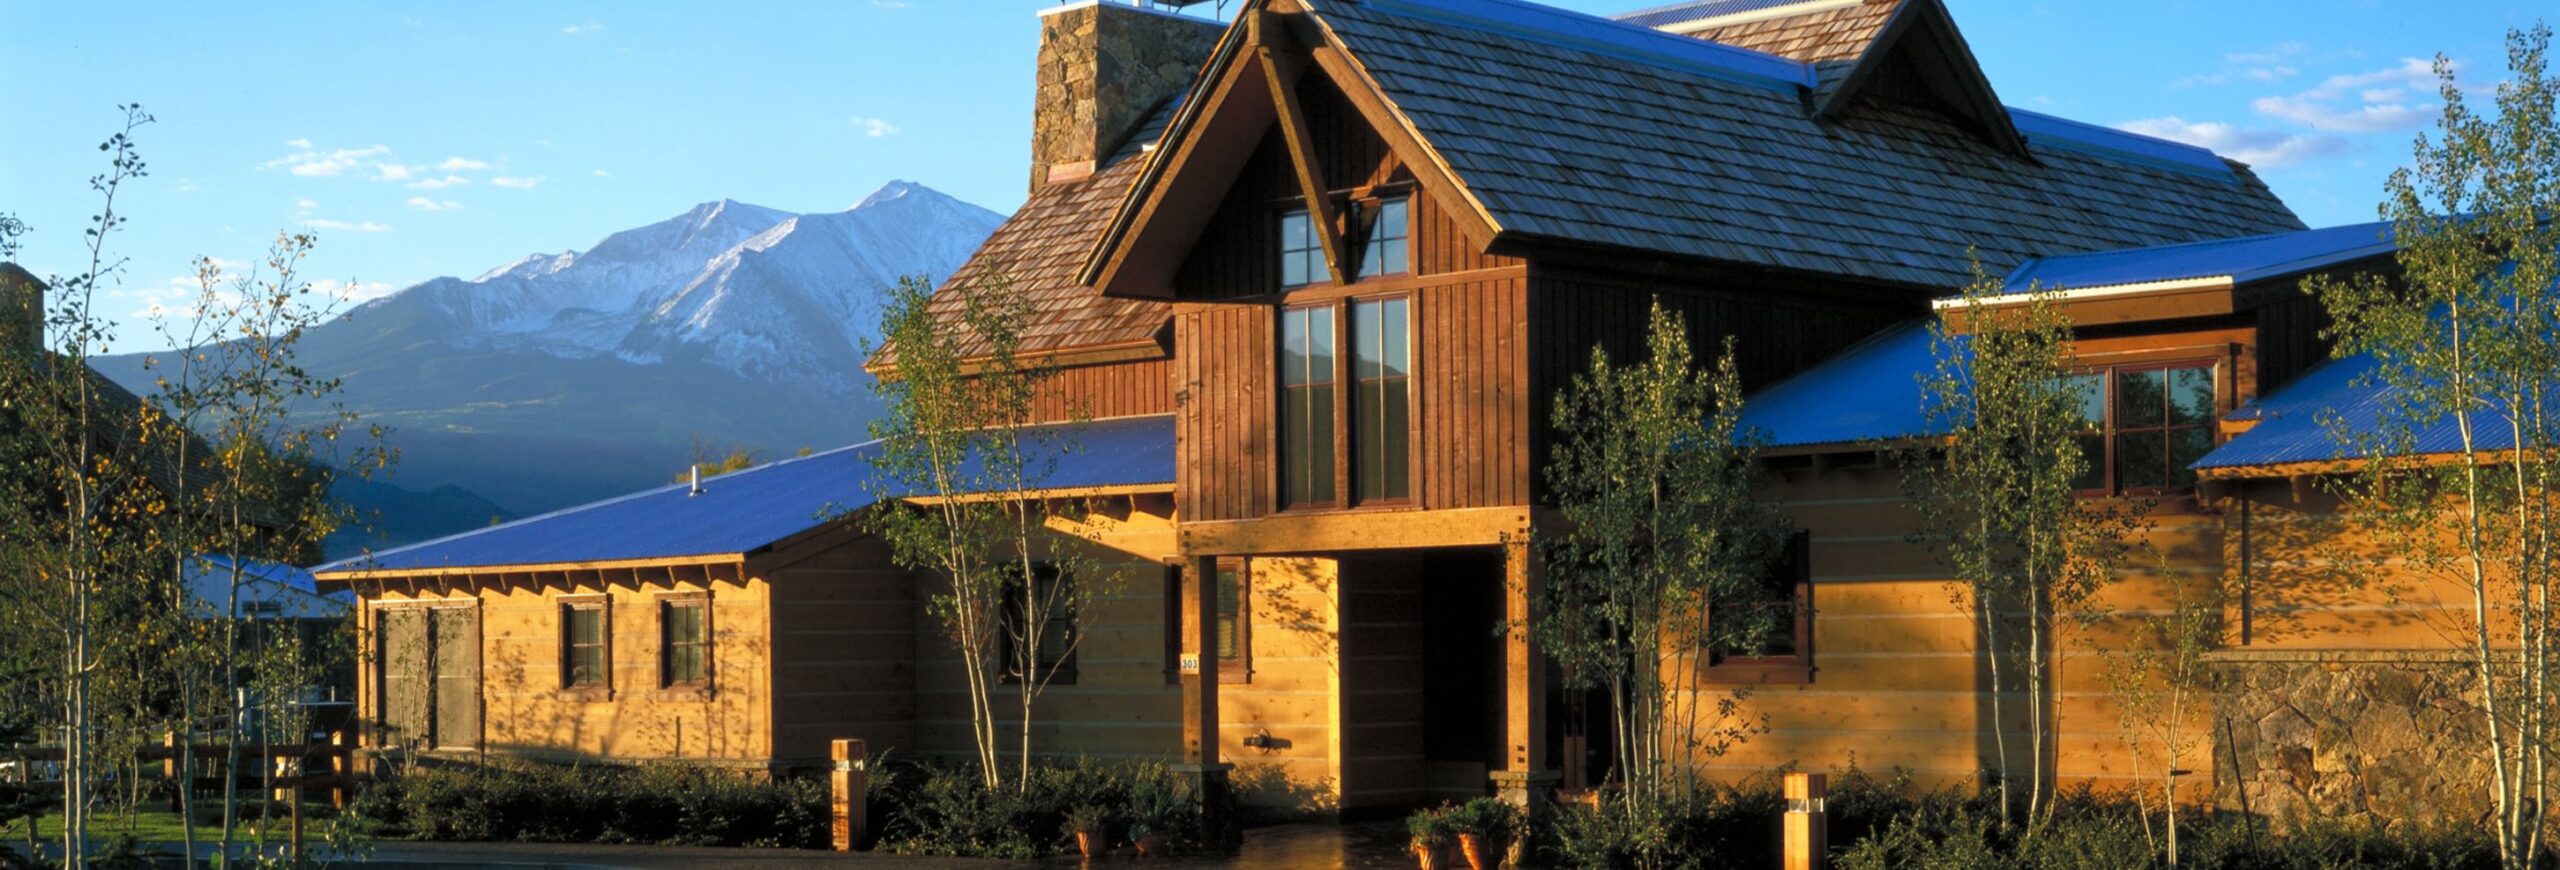 In this image, the River Valley Ranch golf course clubhouse is showcased against a backdrop of snowcapped mountains.